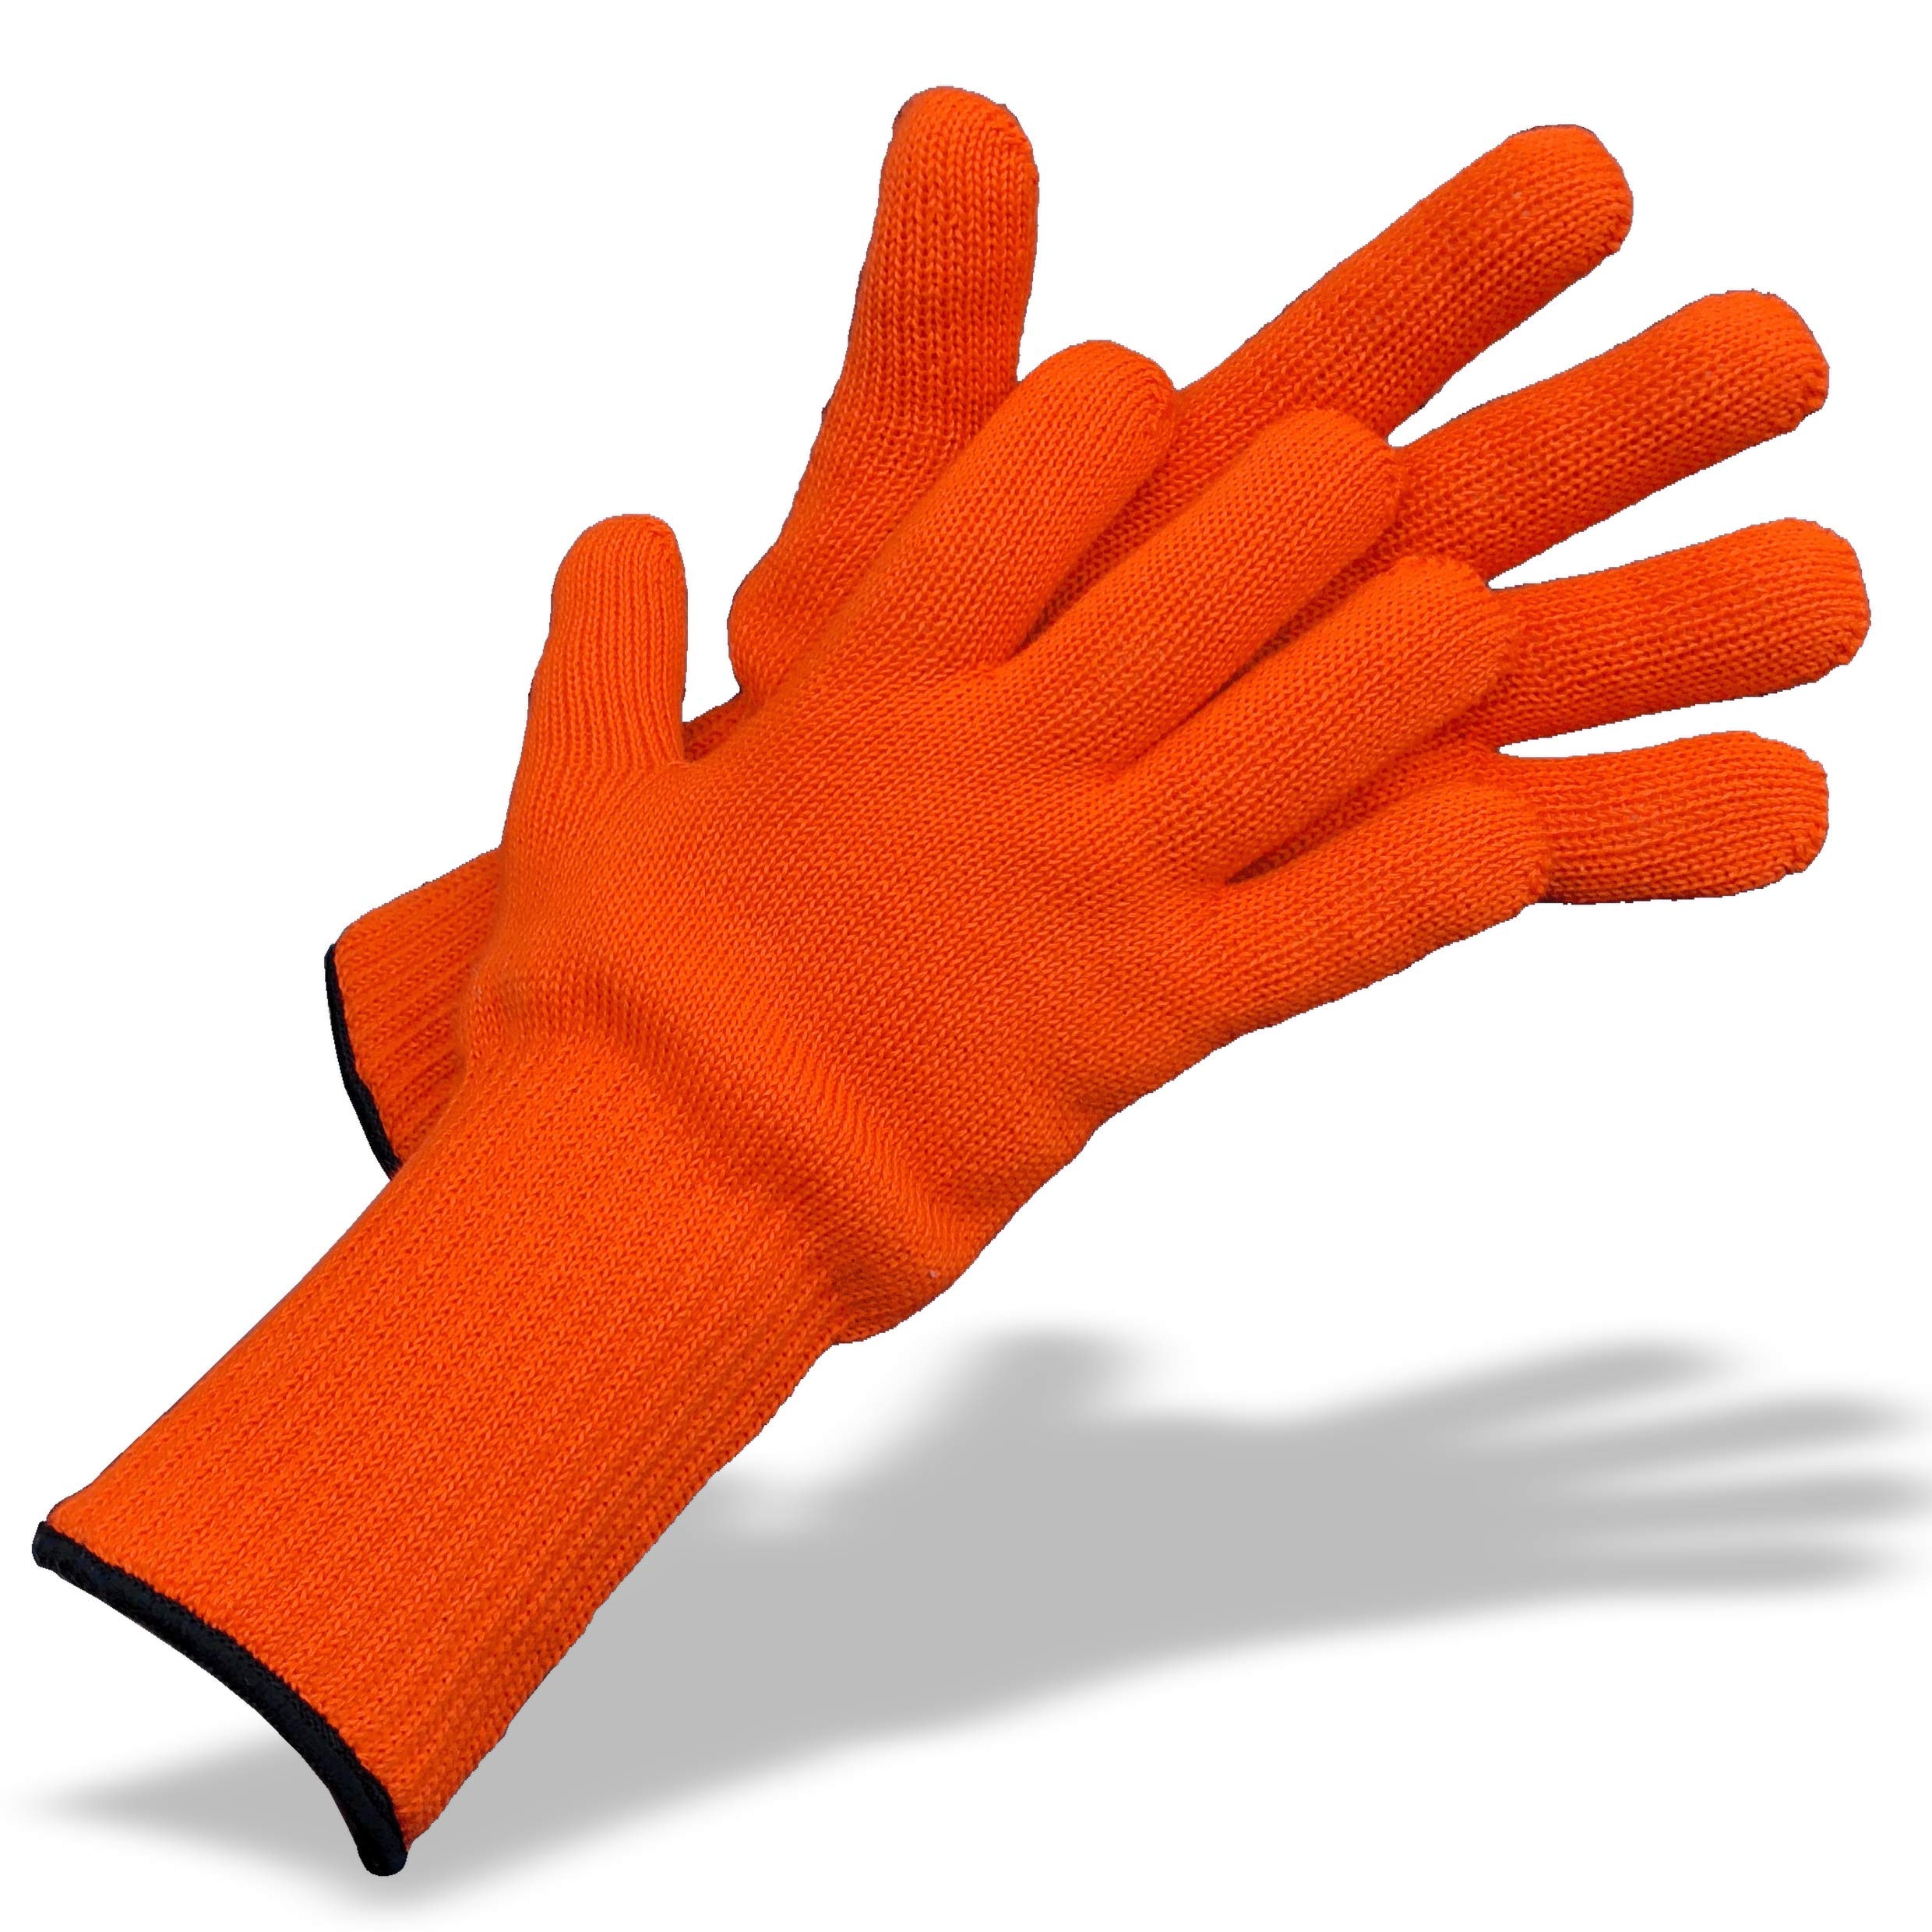 Medipaq® Long Wrist Protect Heatproof Oven Gloves - Hold BURNING hot dishes safely! Heavy Duty Oven Mitts For Professional and Kitchen Use (1x Pair - Orange)